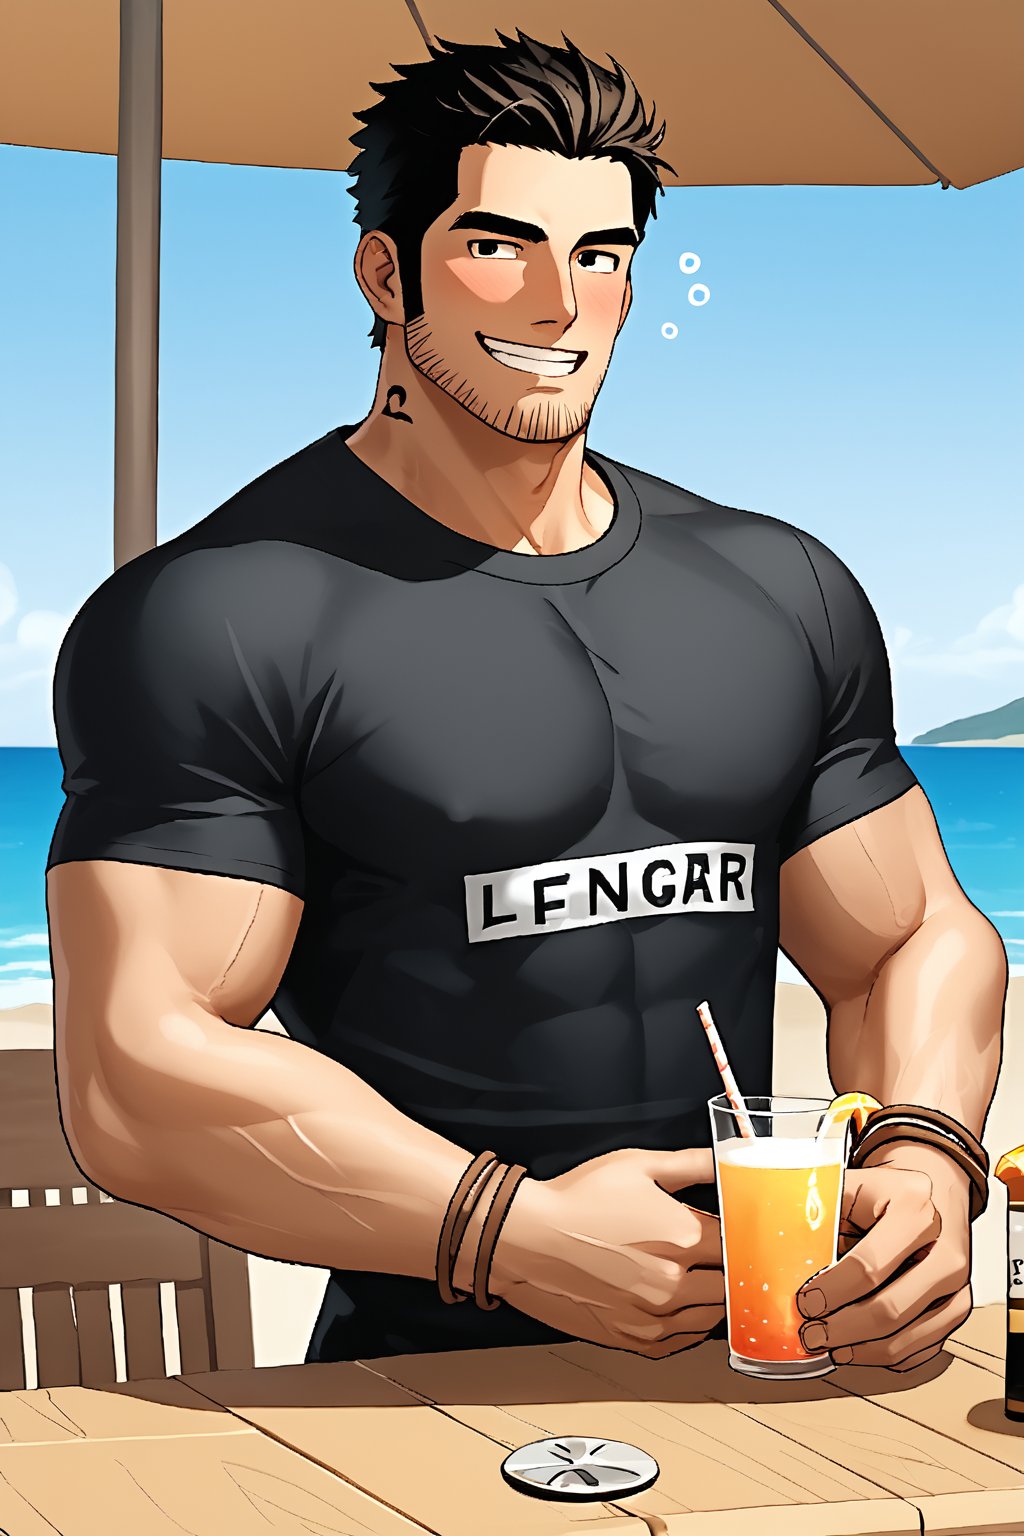 SCORE_9, SCORE_8_UP, 1BOY, MATURE MALE, FORMALWEAR, SHIRT, AT TABLE OUTDOORS AT BEACH BAR, SKY, DRINK, BLUSHES, DRUNK, MUSCULAR, SHORT HAIR, CHEERS, YATTA NE!, TRULYEVIL GRIN FOR FUN, HANDSOME, INTRICATE EYES, MANLY MALE, 3D, CEL-SHADING, SOURCE_ANIME, BEACH, OCEAN, VIVID, ALIVE, RATING_QUESTIONABLE, RATING_VERYRETARDED ,Lucas_Lee